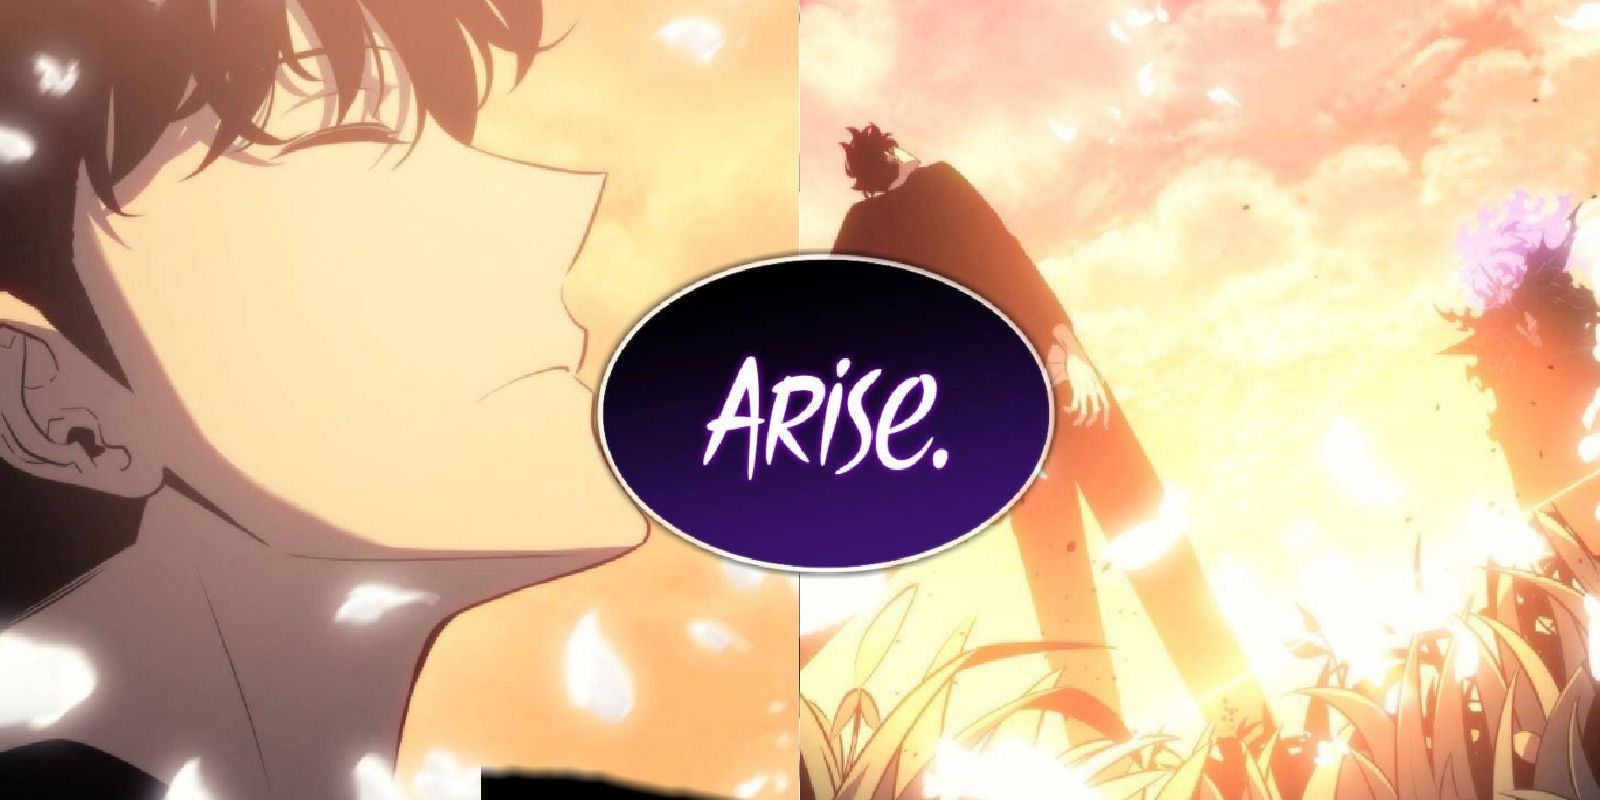 Sung Jinwoo uses Arise on himself in solo leveling manhwa